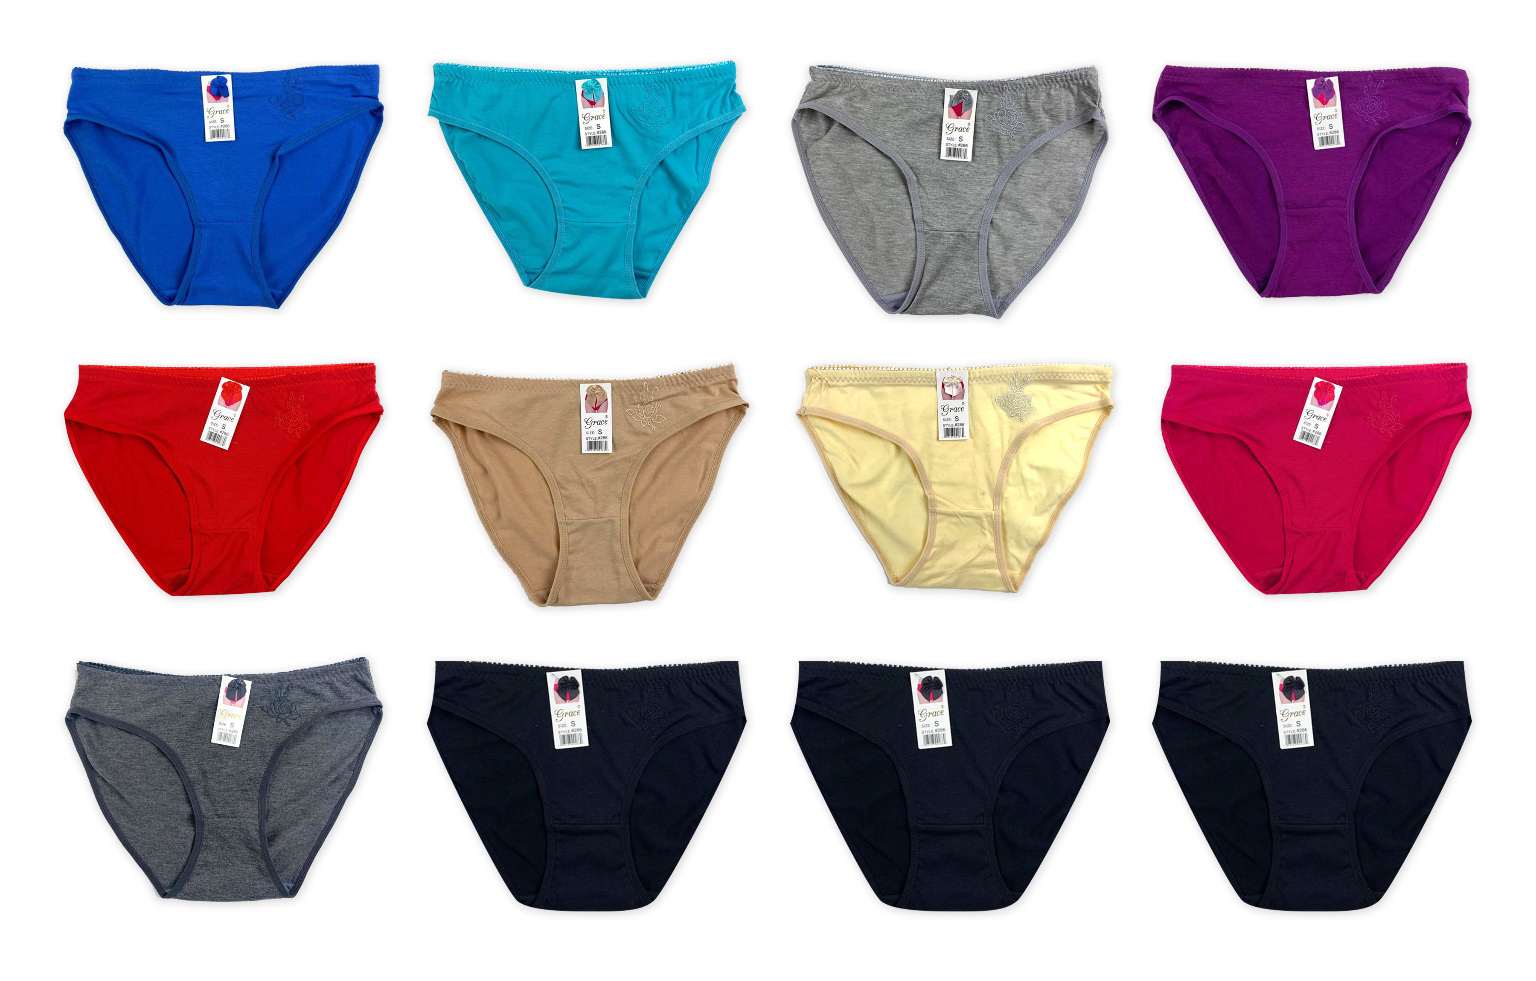 Wholesale Women's Panties - Assorted, S-XL, Polyester